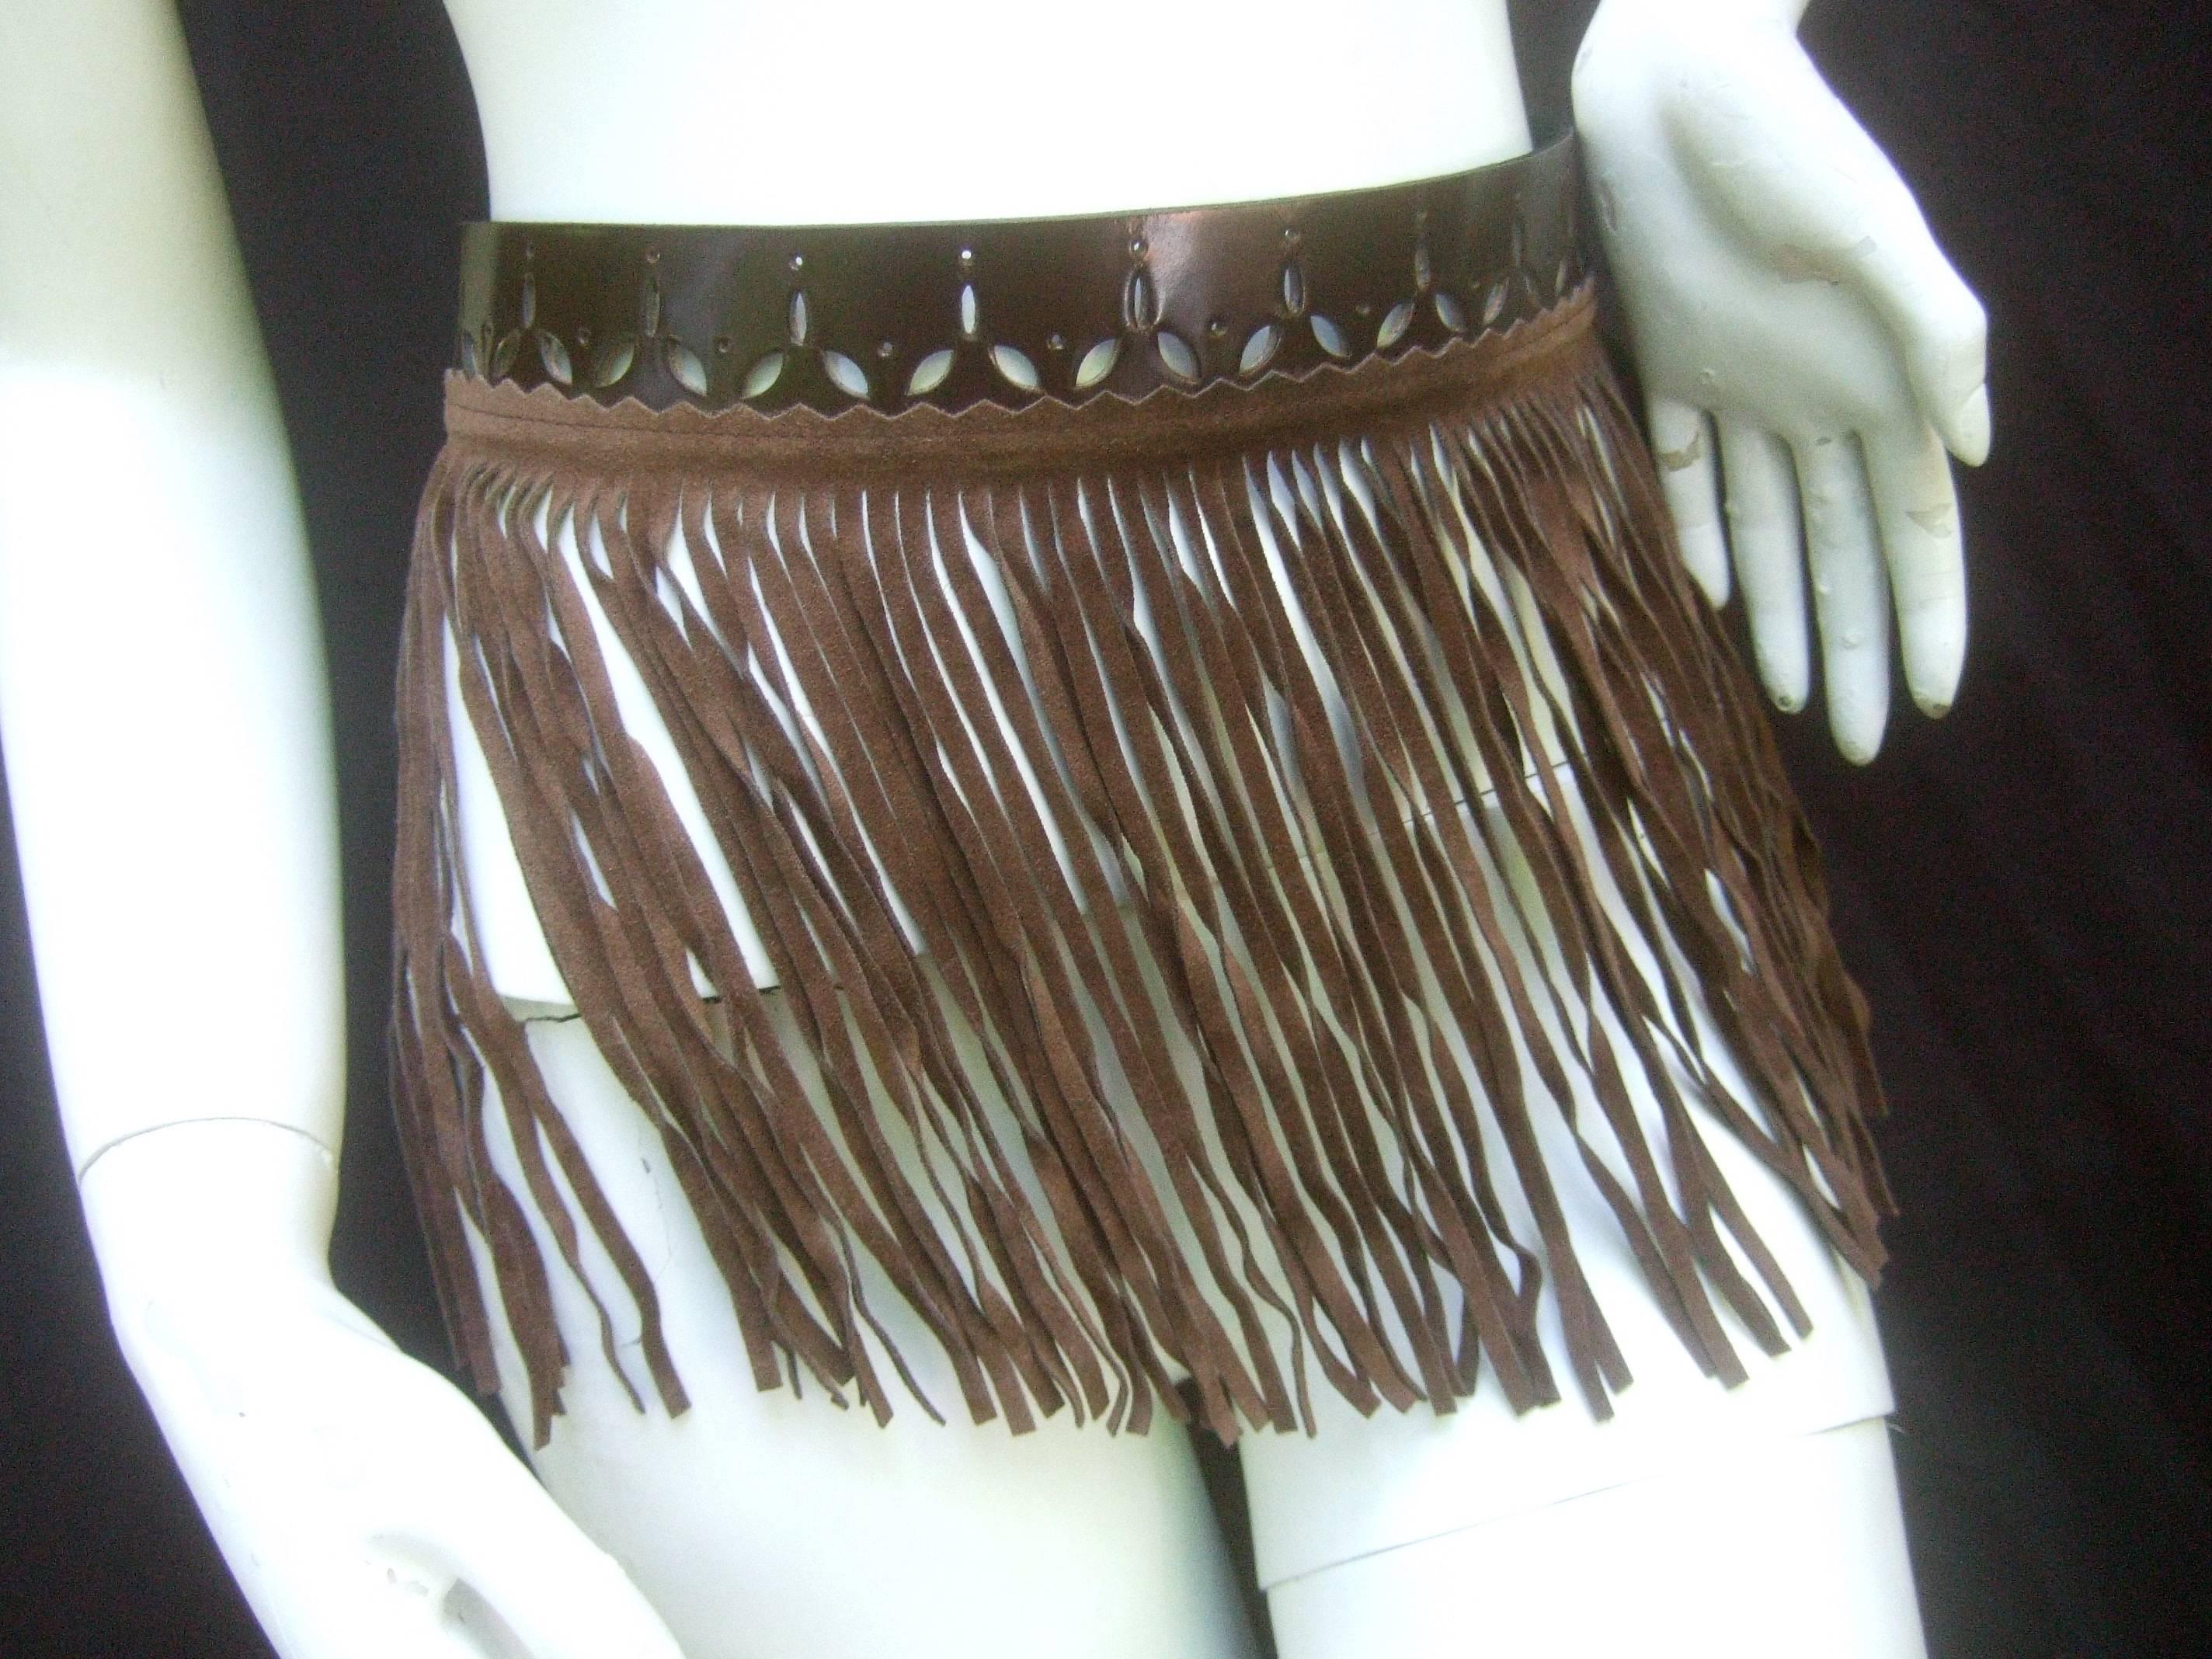 Exotic brown fringe suede belt designed by Herve Masson Paris 
The avant garde belt is designed with long sinuous 
brown suede tassels 

The belt is smooth brown leather with unique perforated 
cutout designs throughout. The versatile belt may be